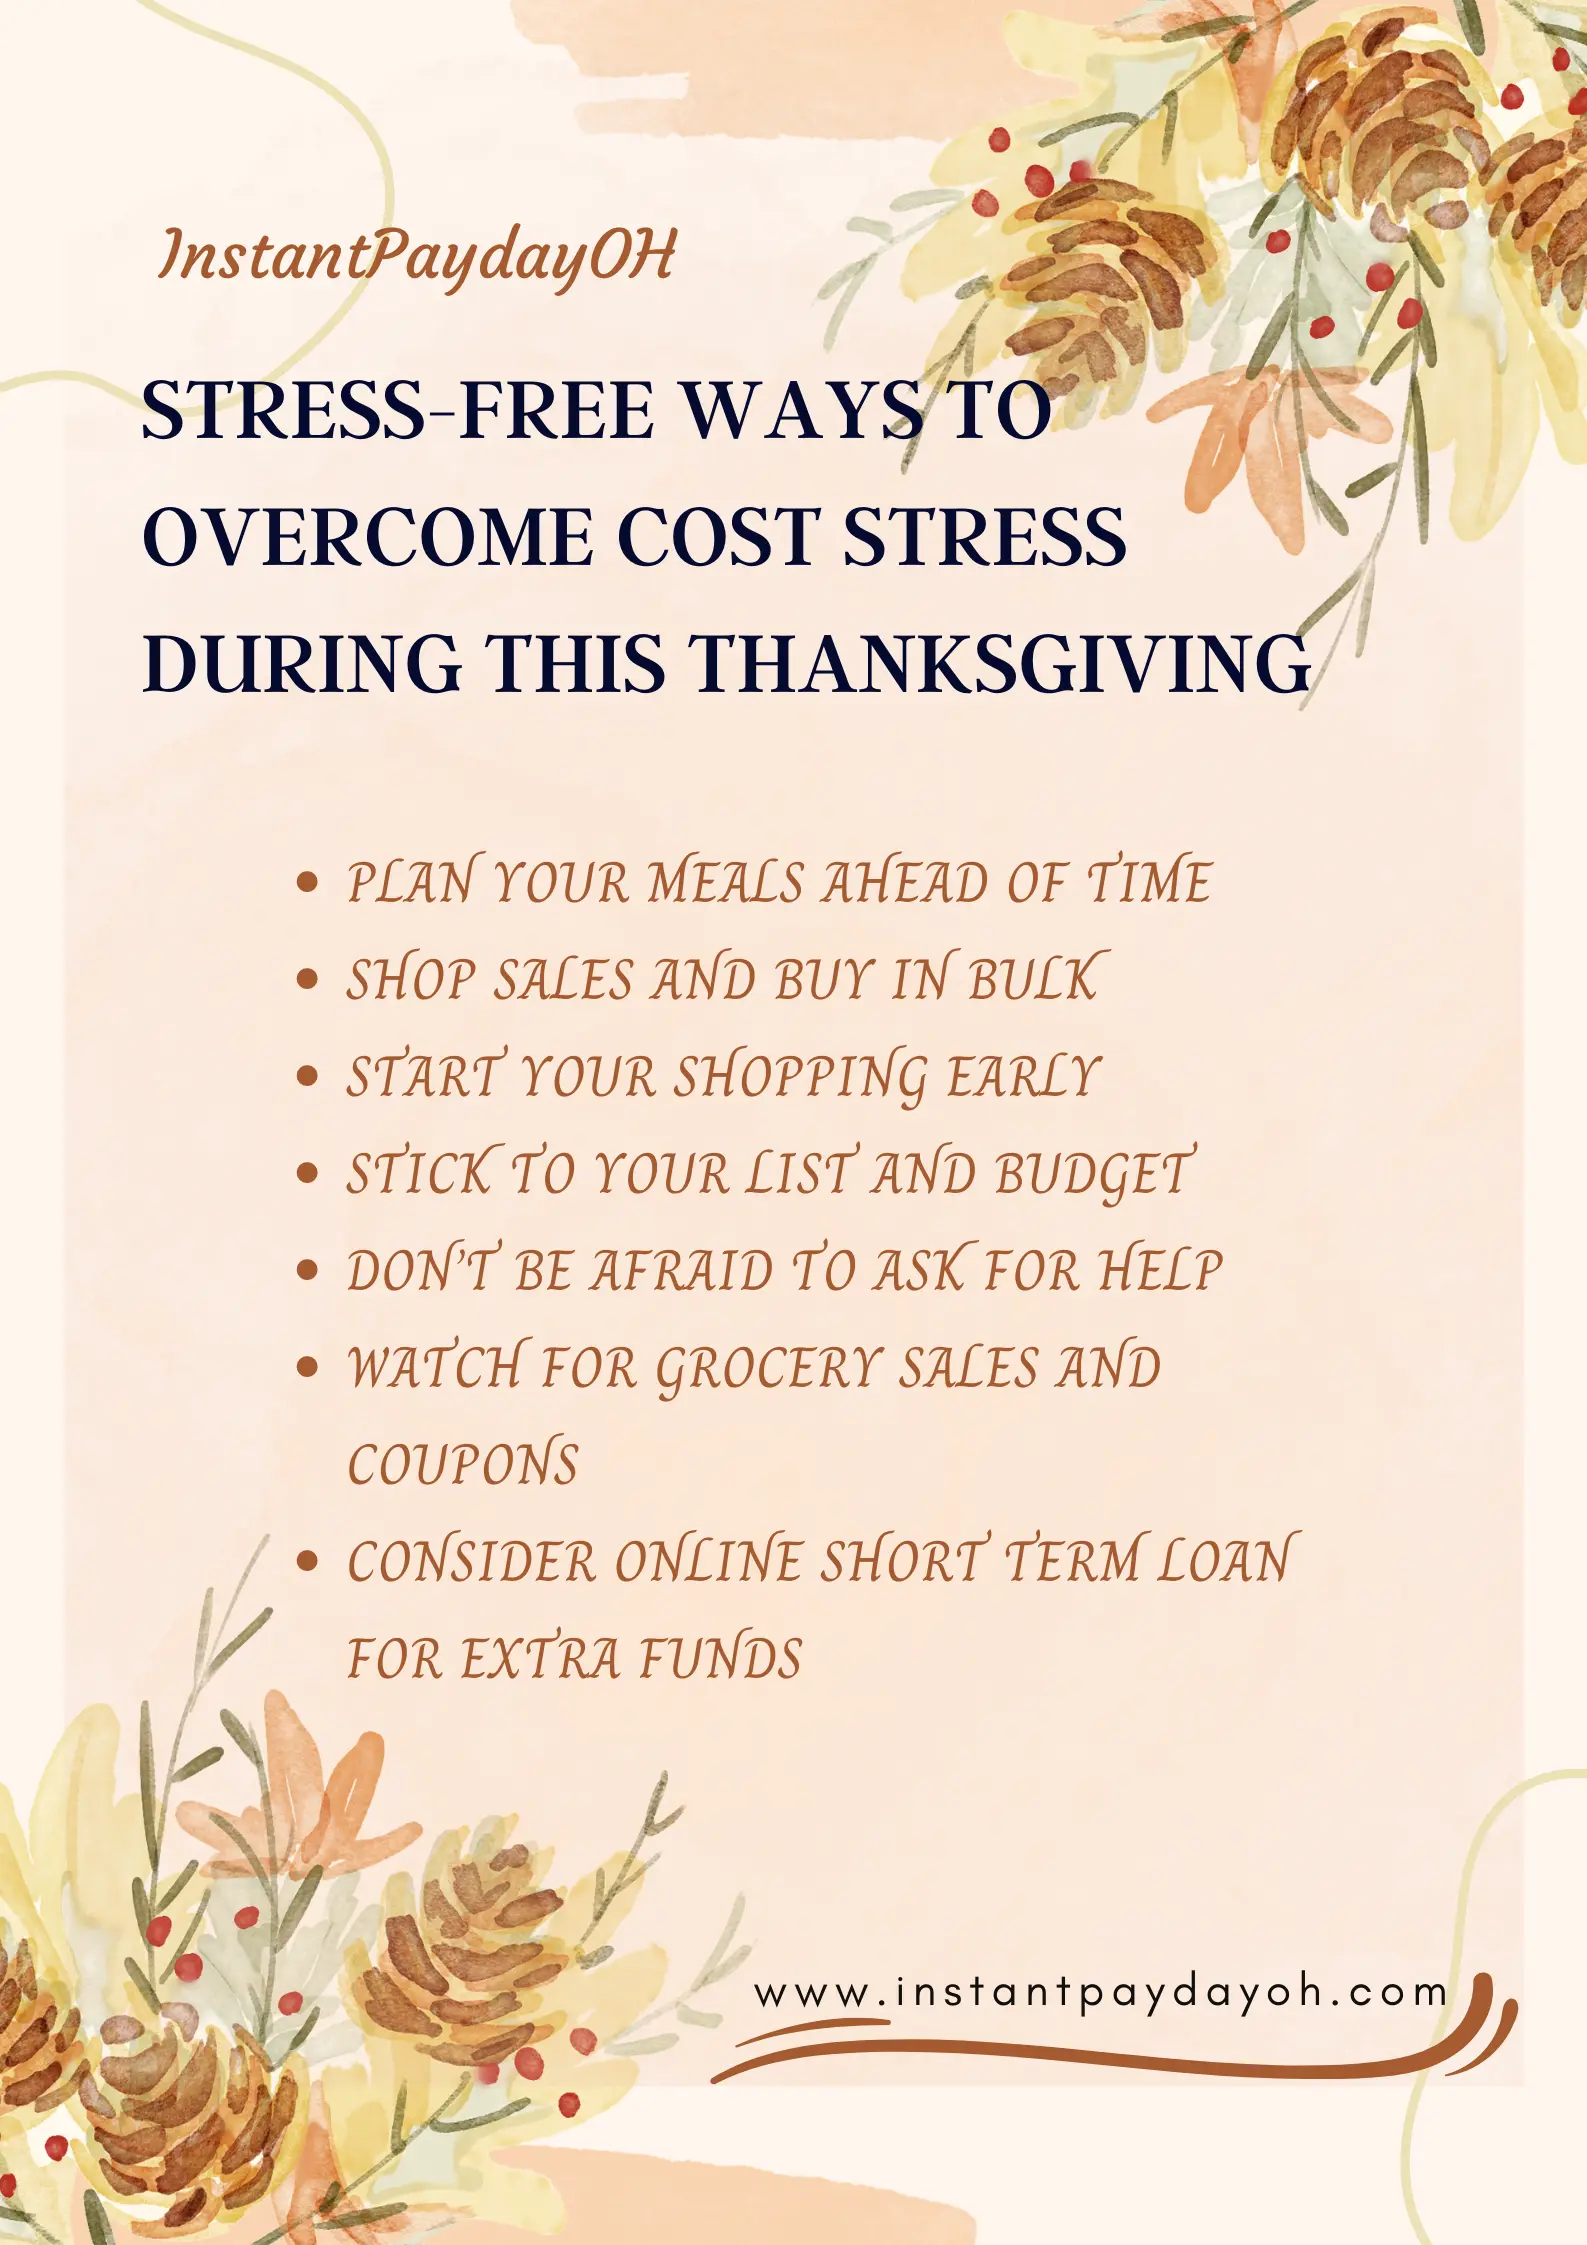 Stress-Free Ways to Overcome Cost Stress During This Thanksgiving